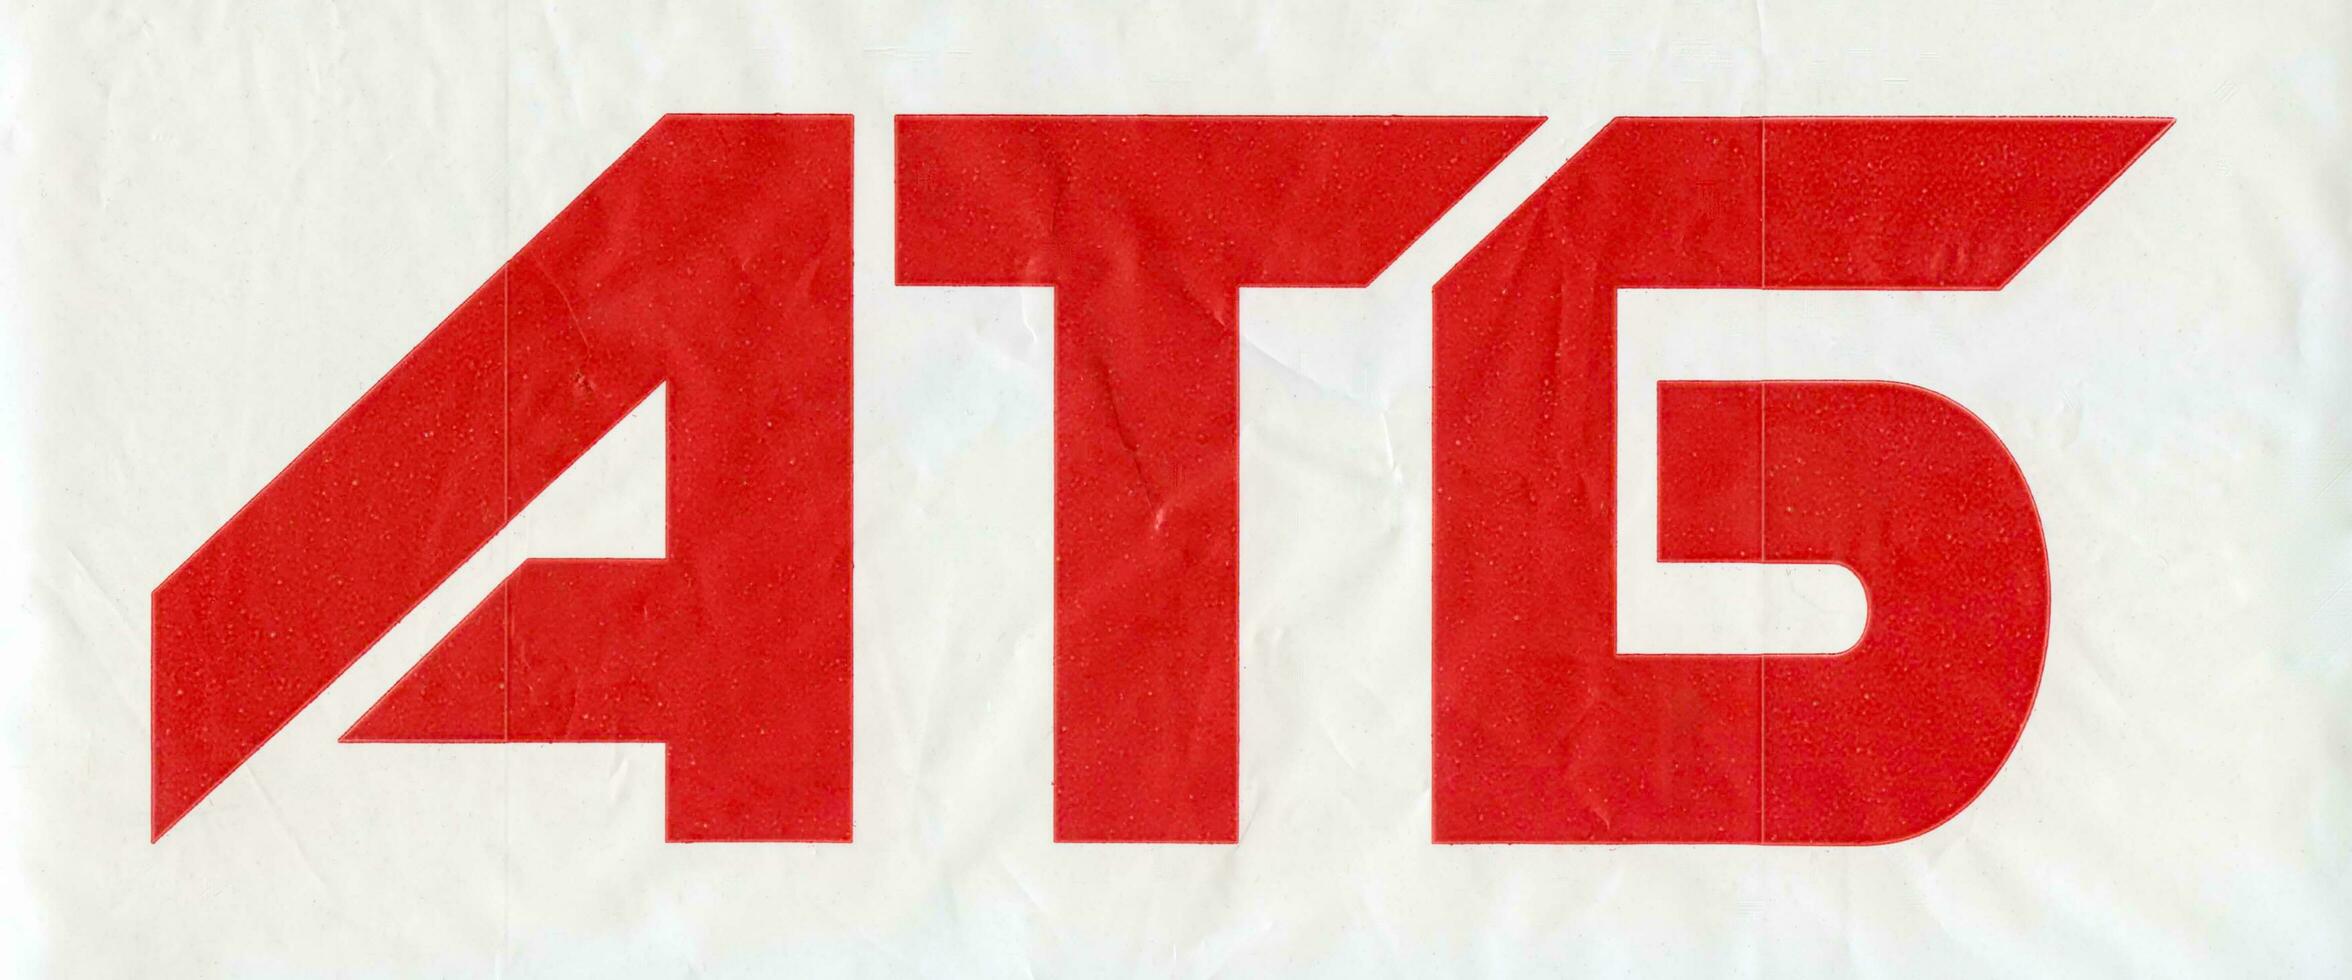 Atb logo on a bag or plastic bag with d2w added. Translation, Atb. Trading network of supermarkets in Ukraine. Environmental Protection. Ukraine, Kyiv -11 September, 2022. photo